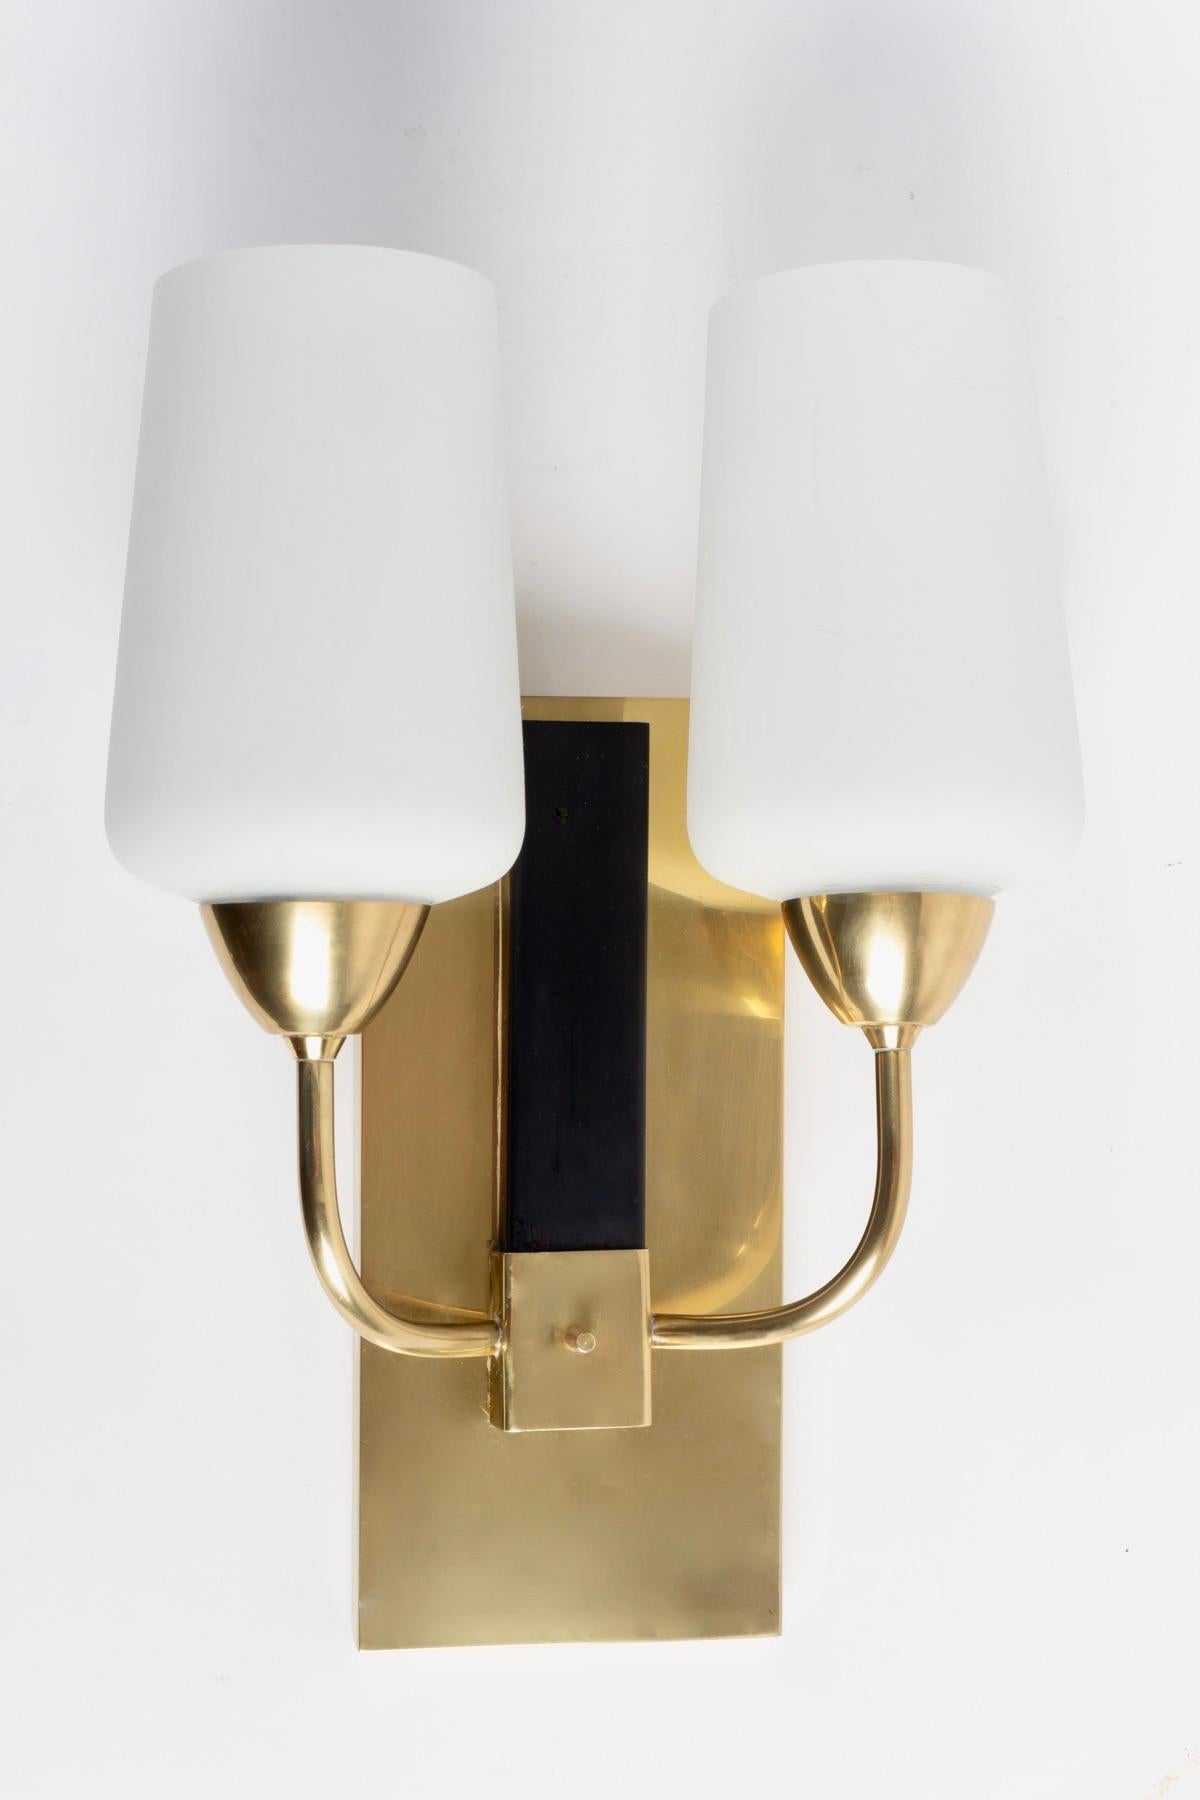 Pair of Maison Lunel wall lights from the 1950s,

Composed of a large wall plate in gilded brass on which are positioned two sconces formed by two rising rods, they are dressed in satin opal glass.
A small blackened brass plaque placed on the wall